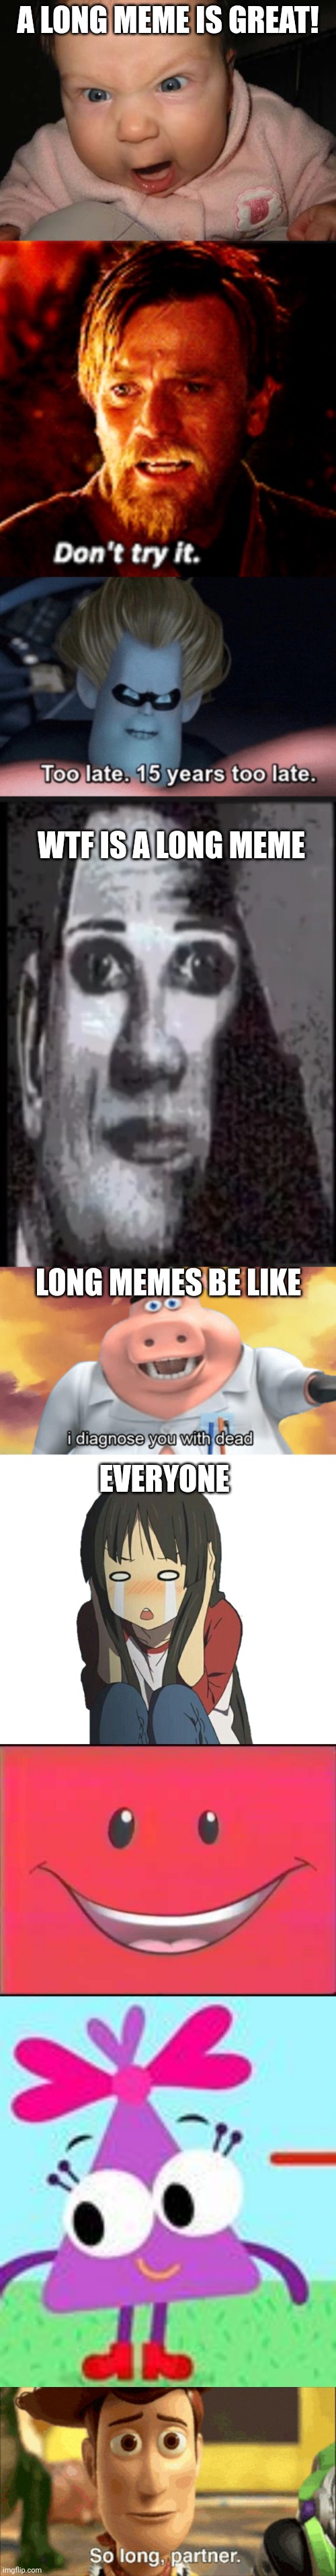 A LONG MEME IS GREAT! WTF IS A LONG MEME; LONG MEMES BE LIKE; EVERYONE | image tagged in evil baby,don't try it,too late,mr incredible uncanny phase 4,i diagnose you with dead,long meme | made w/ Imgflip meme maker